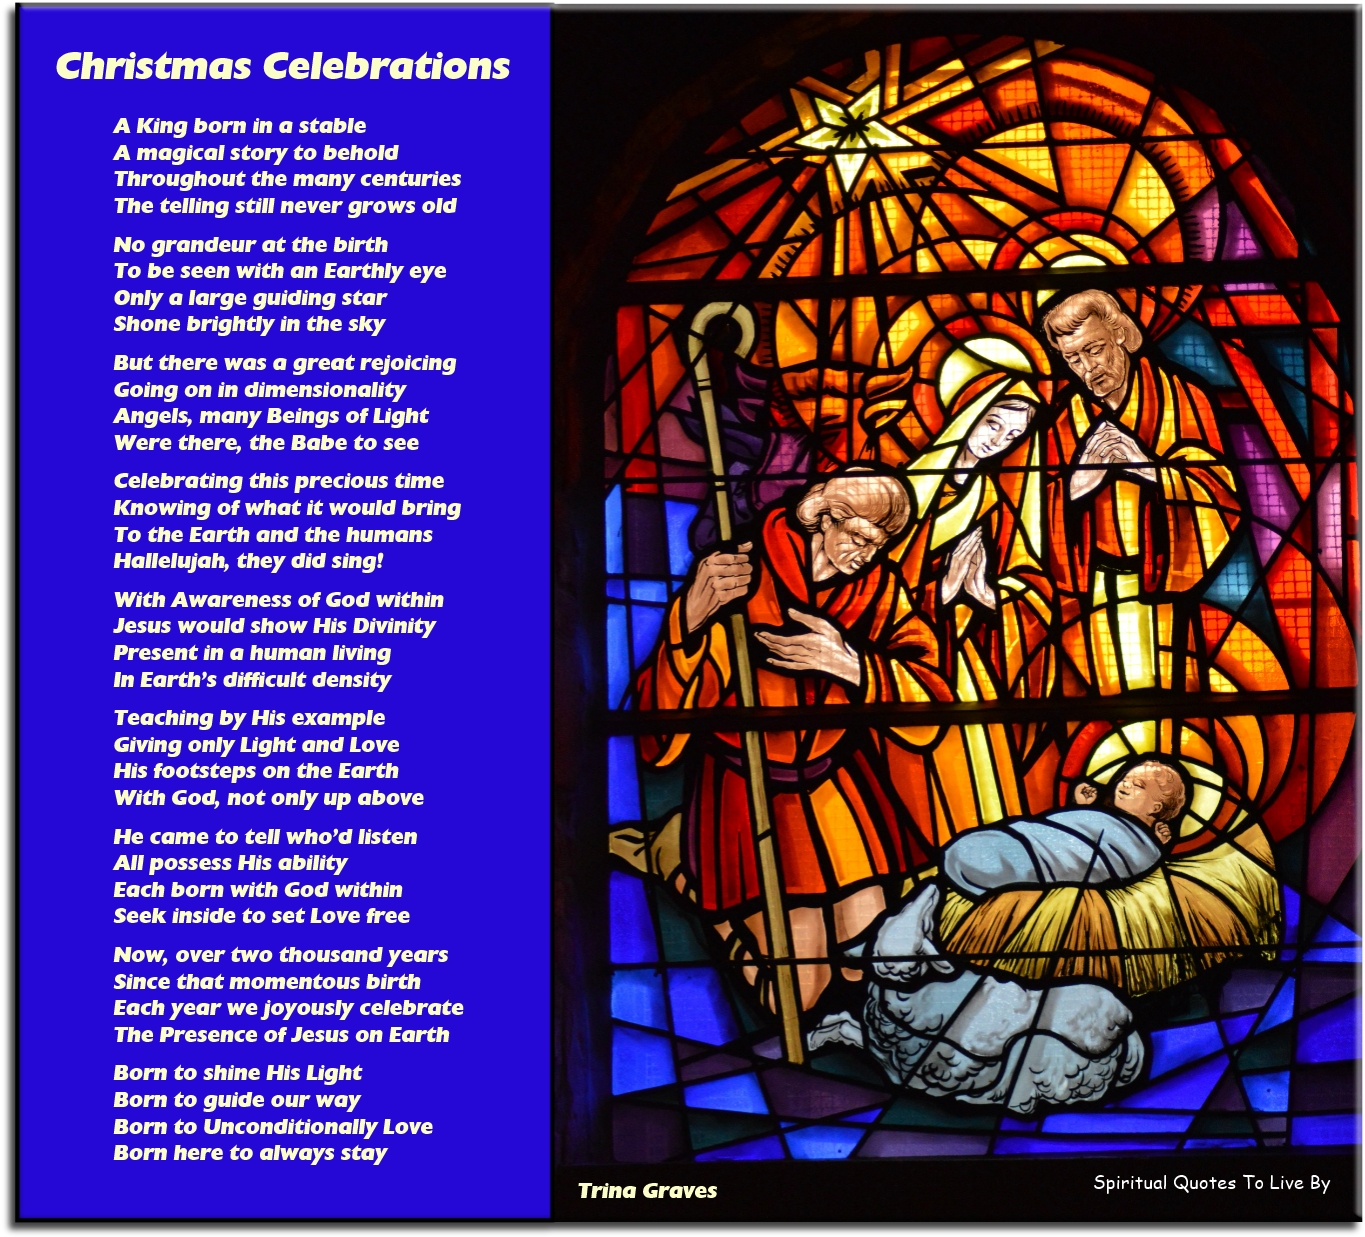 Christmas Celebrations - Inspirational poem by Trina Graves - Spiritual Quotes To Live By